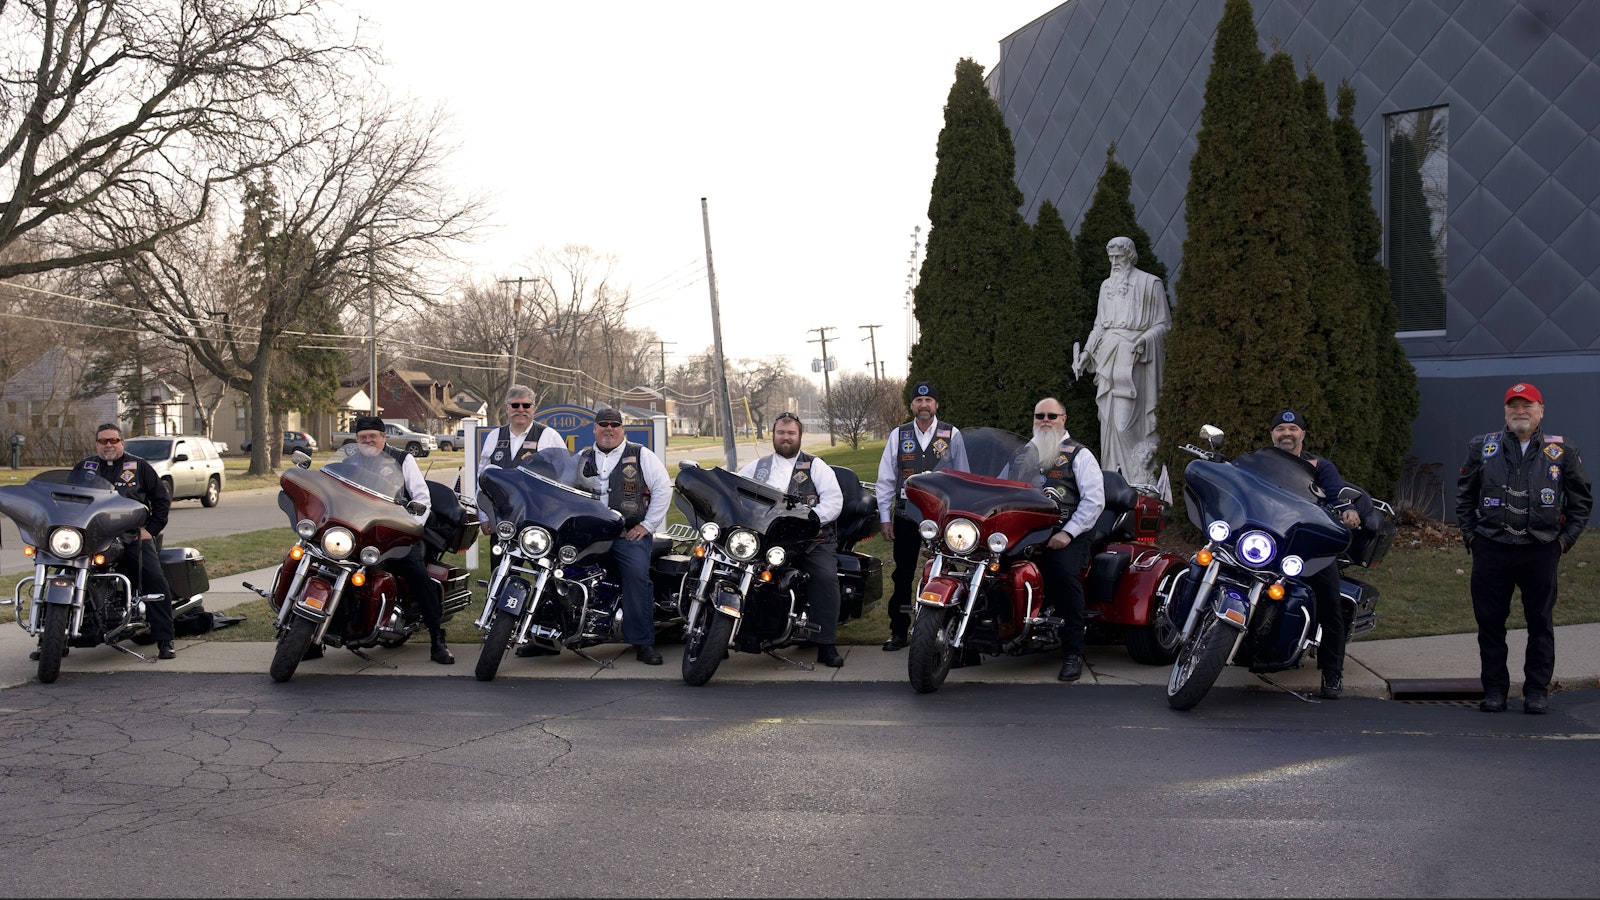 The mission is in part to evangelize the motorcycle community, and the group seeks to uphold the four pillars of the Knights of Columbus: charity, unity, fraternity and patriotism.